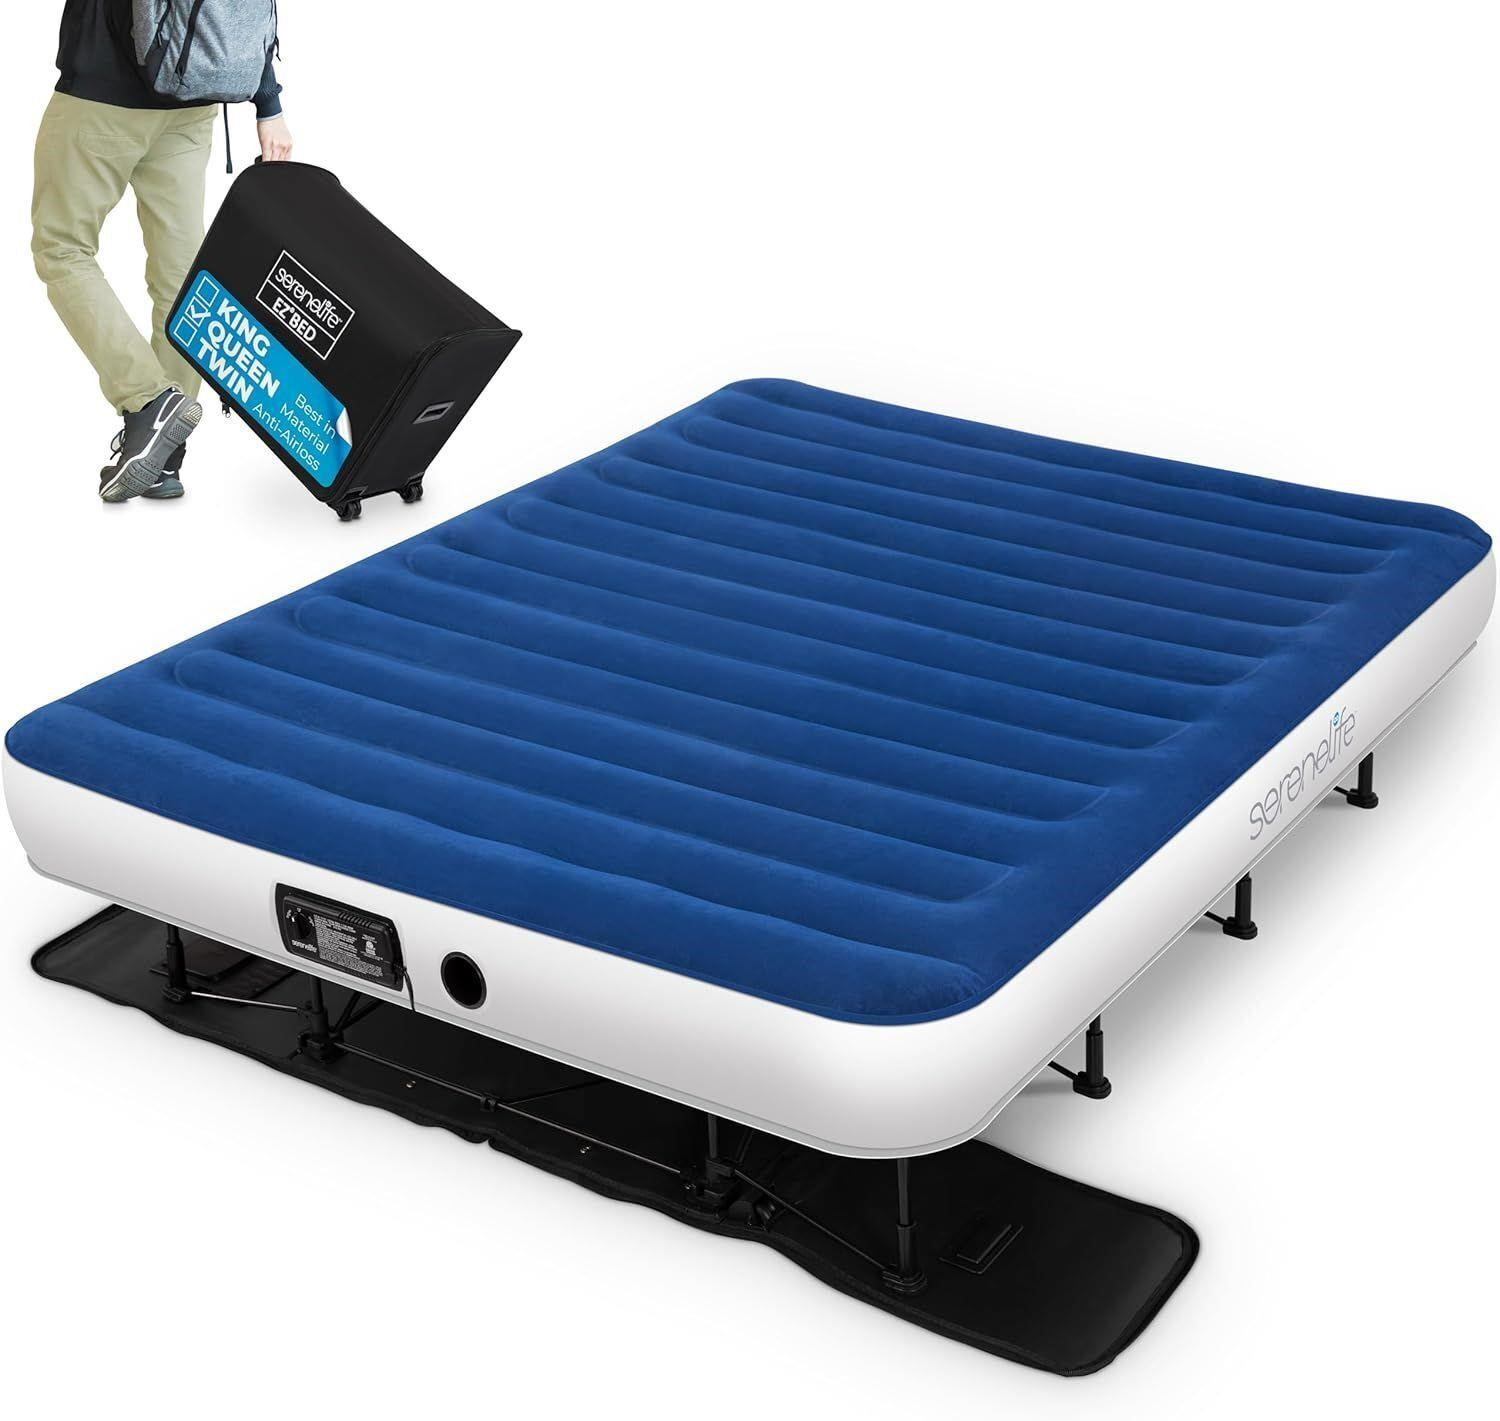 QUEEN SereneLife EZ Bed Air Mattress with Frame